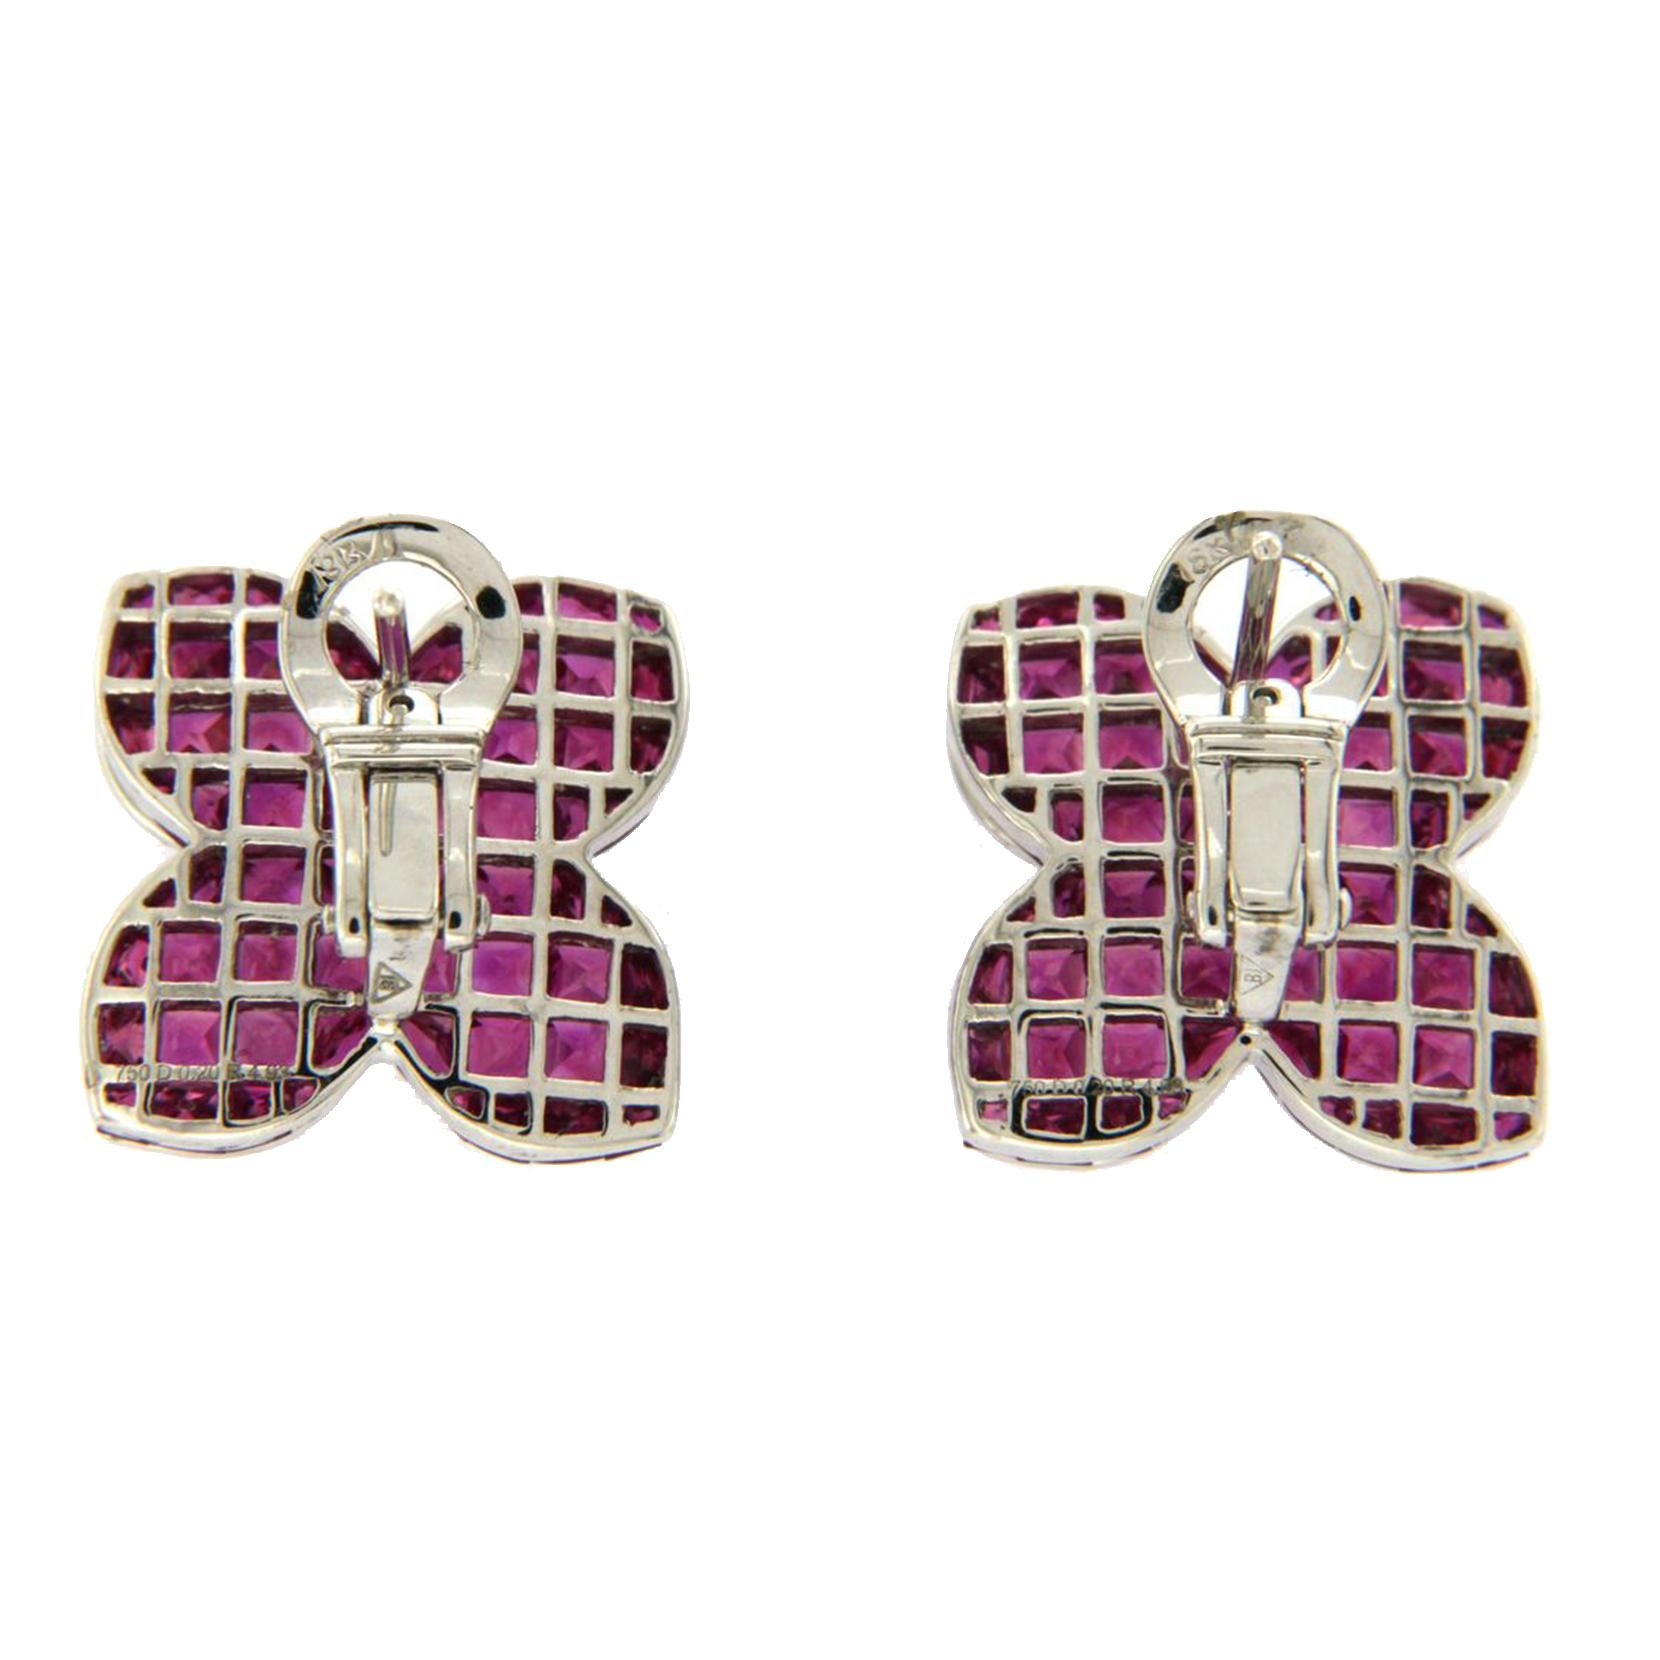 18 Karat White Gold 0.32 Carat Diamonds and Invisible 9.86 Carat Ruby Earrings In Excellent Condition For Sale In Los Angeles, CA